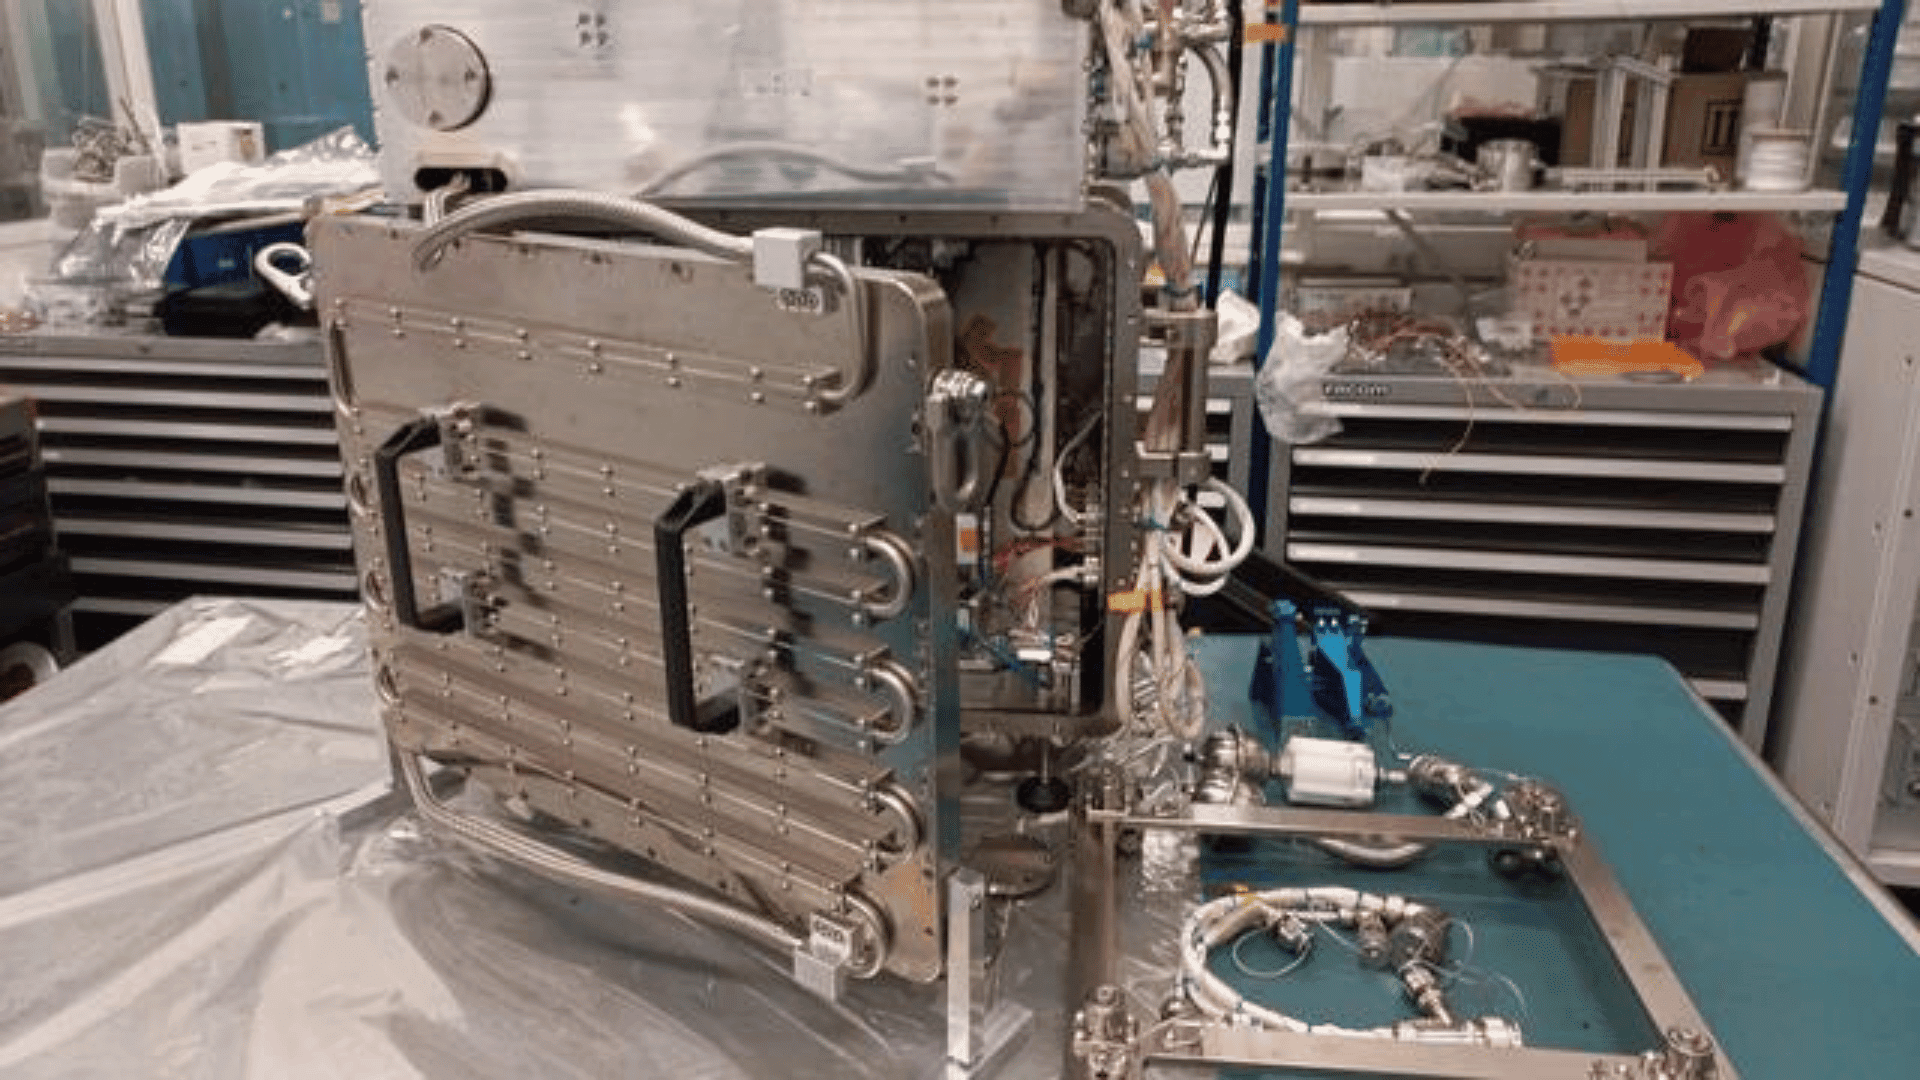 The 3D Metal printer before it was launched to the ISS. ESA